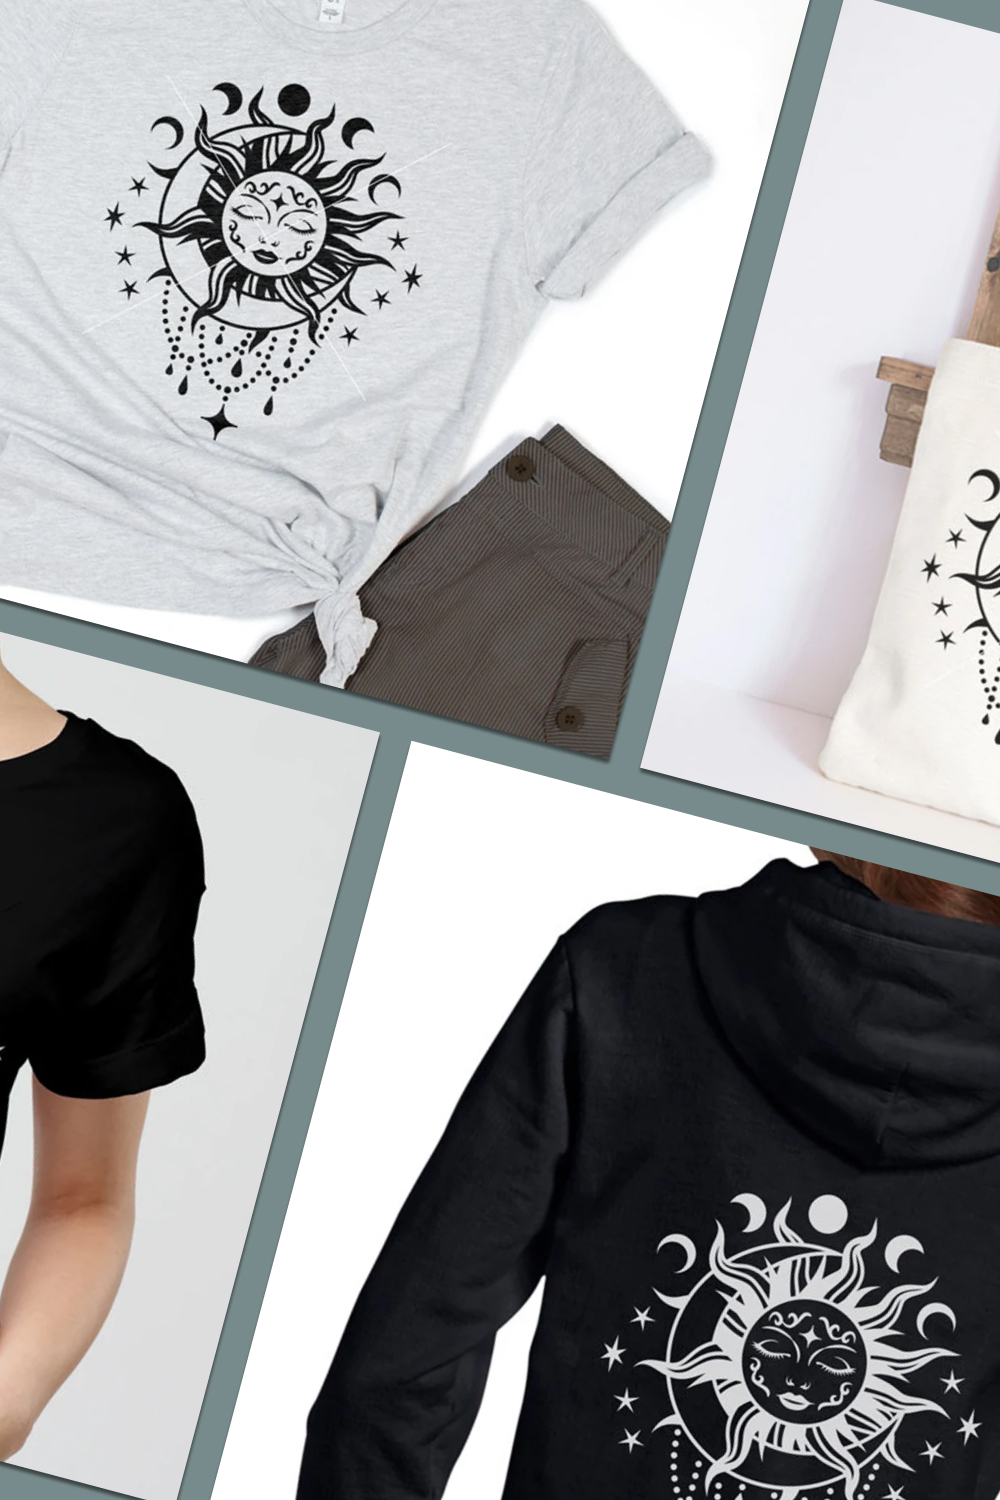 Preview of prints on casual clothes.